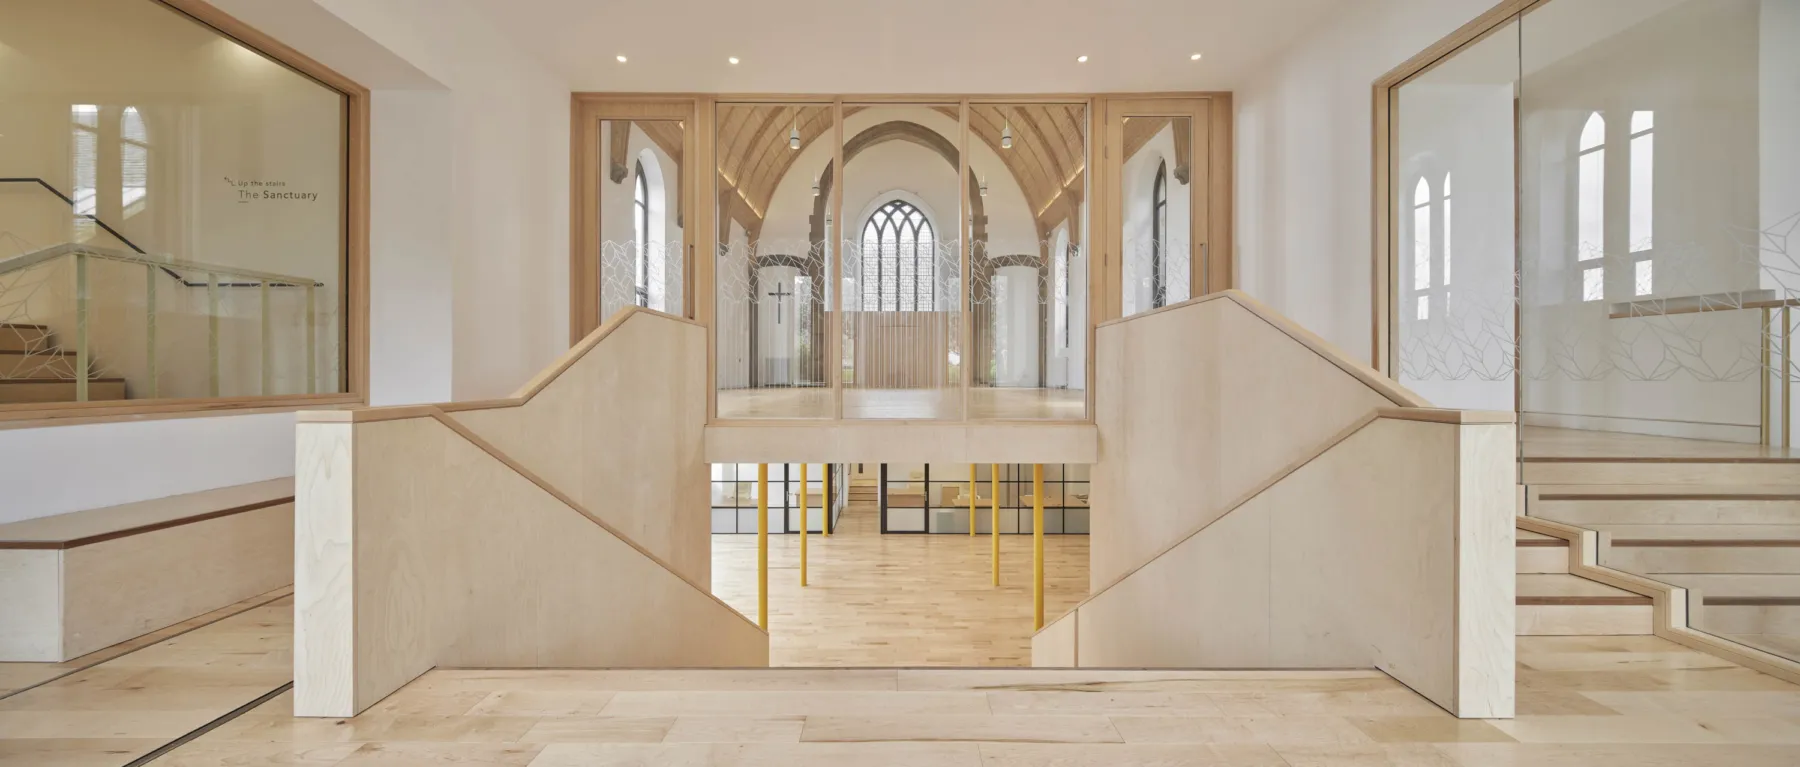 Interior view of the Greyfriars Charteris Centre, Edinburgh, a refurbished and restored church with contemporary extension. Looking though large glass doors to the nave and down the stairs to the undercroft.